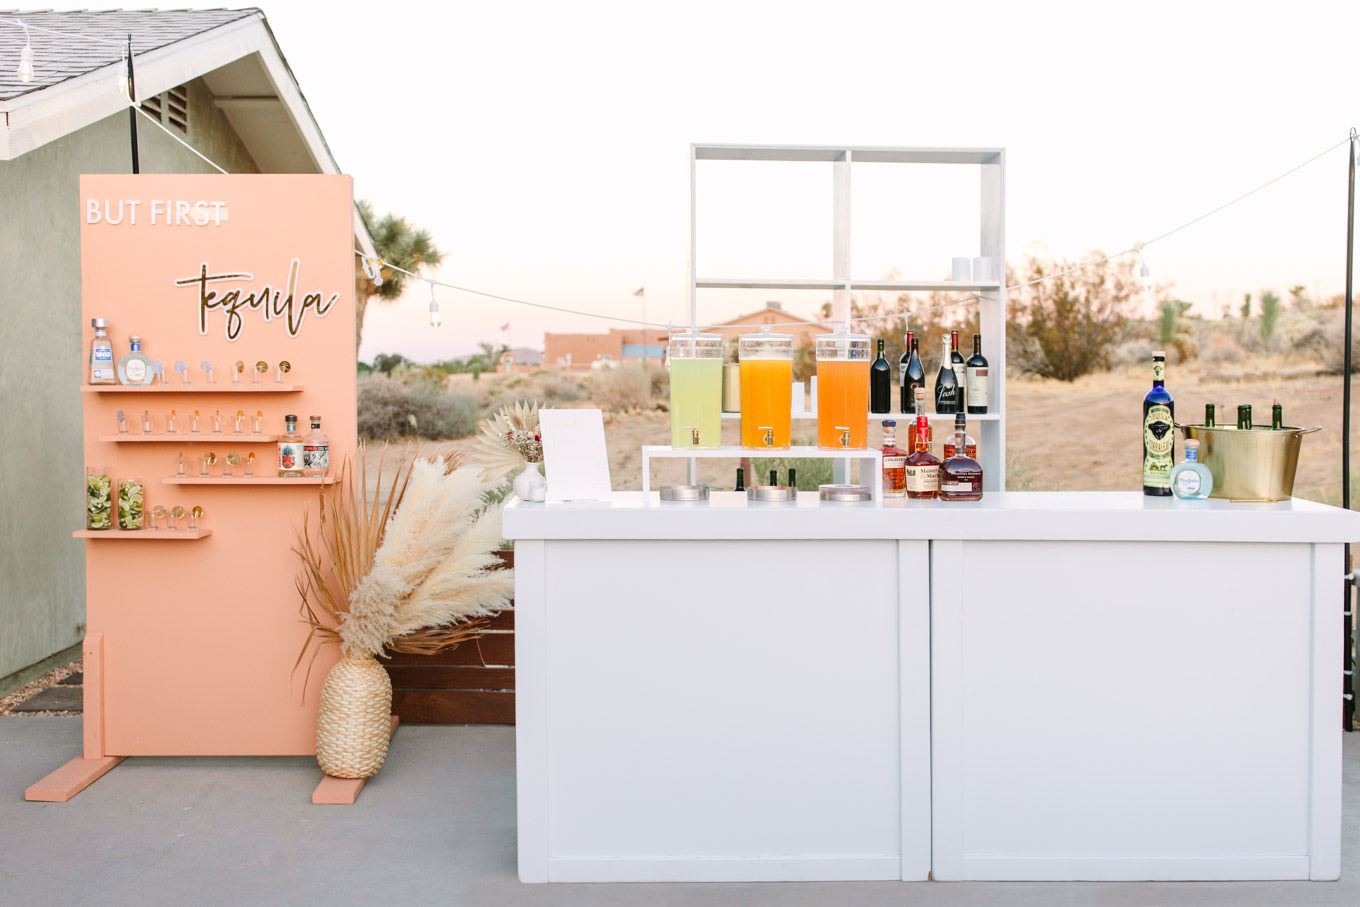 Micro wedding bar setup in Joshua Tree | Engagement, elopement, and wedding photography roundup of Mary Costa’s favorite images from 2020 | Colorful and elevated photography for fun-loving couples in Southern California | #2020wedding #elopement #weddingphoto #weddingphotography #microwedding   Source: Mary Costa Photography | Los Angeles